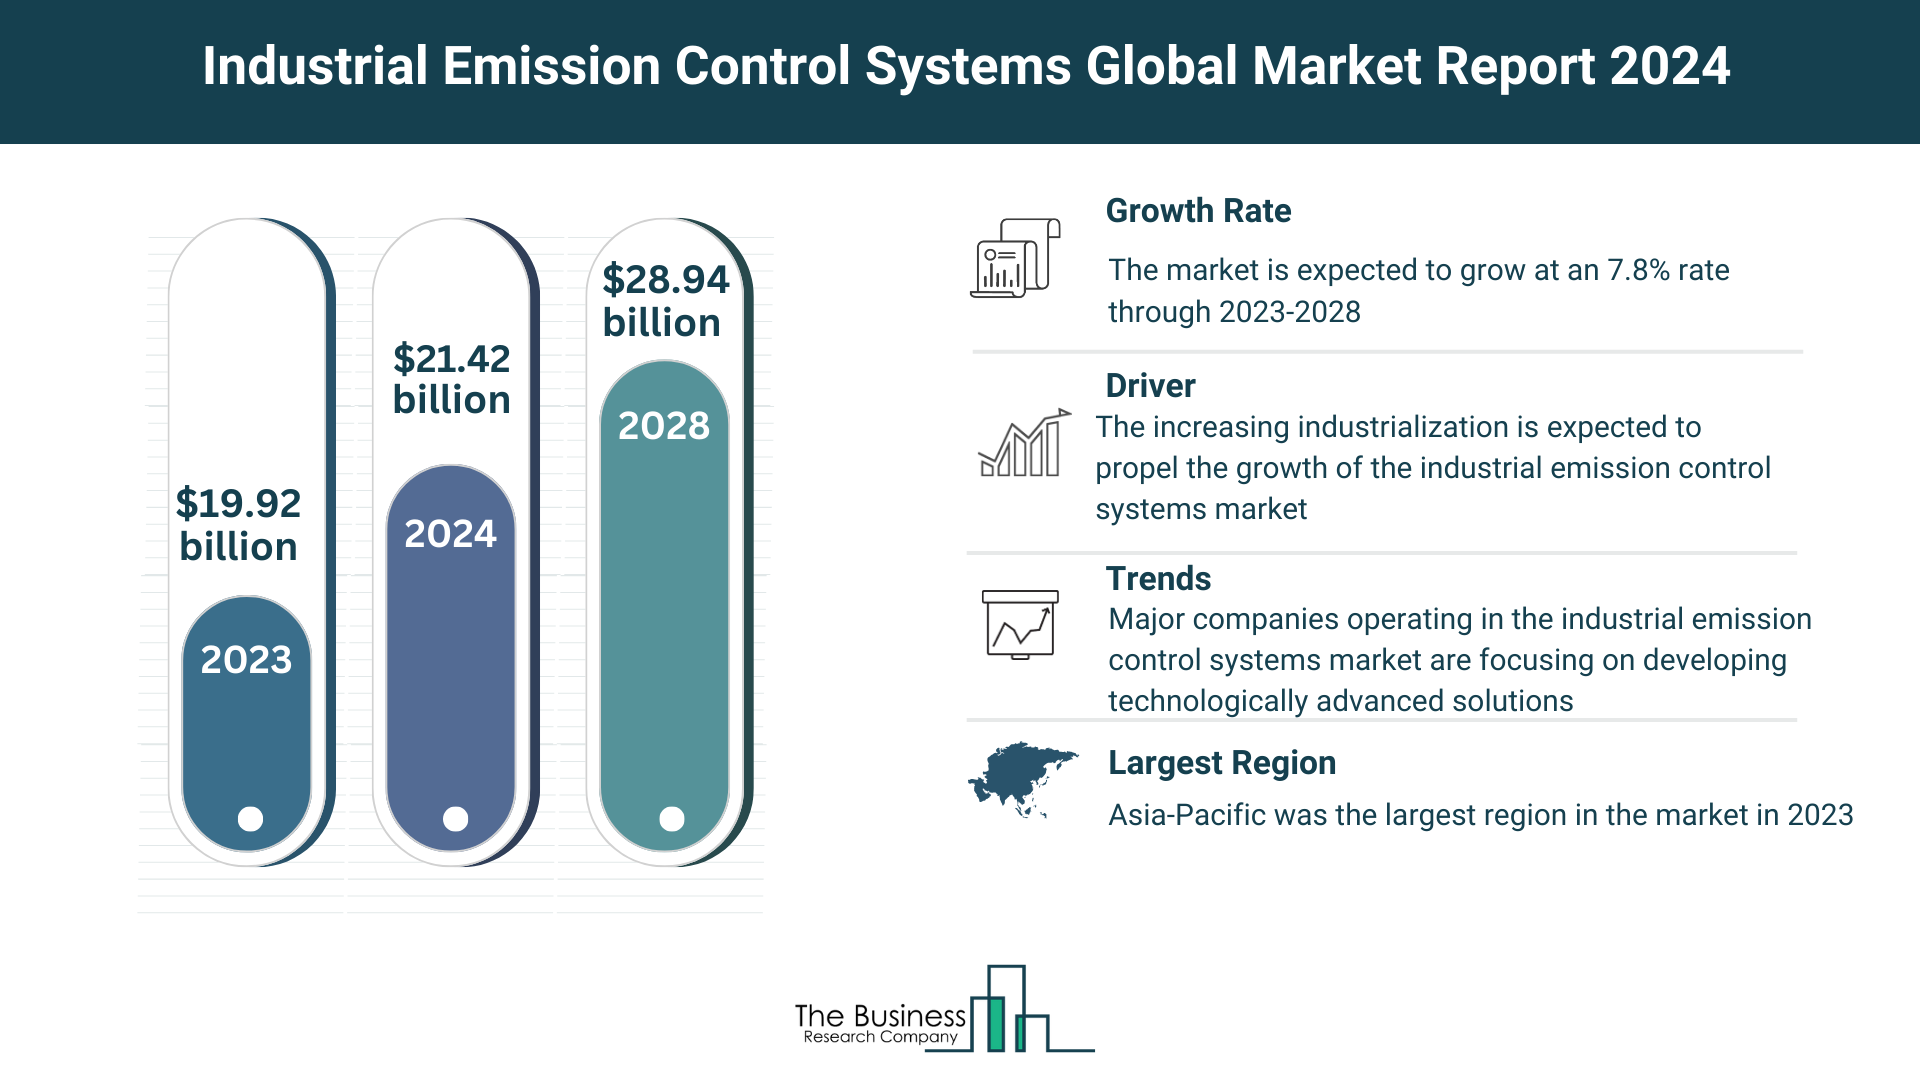 Global Industrial Emission Control Systems Market